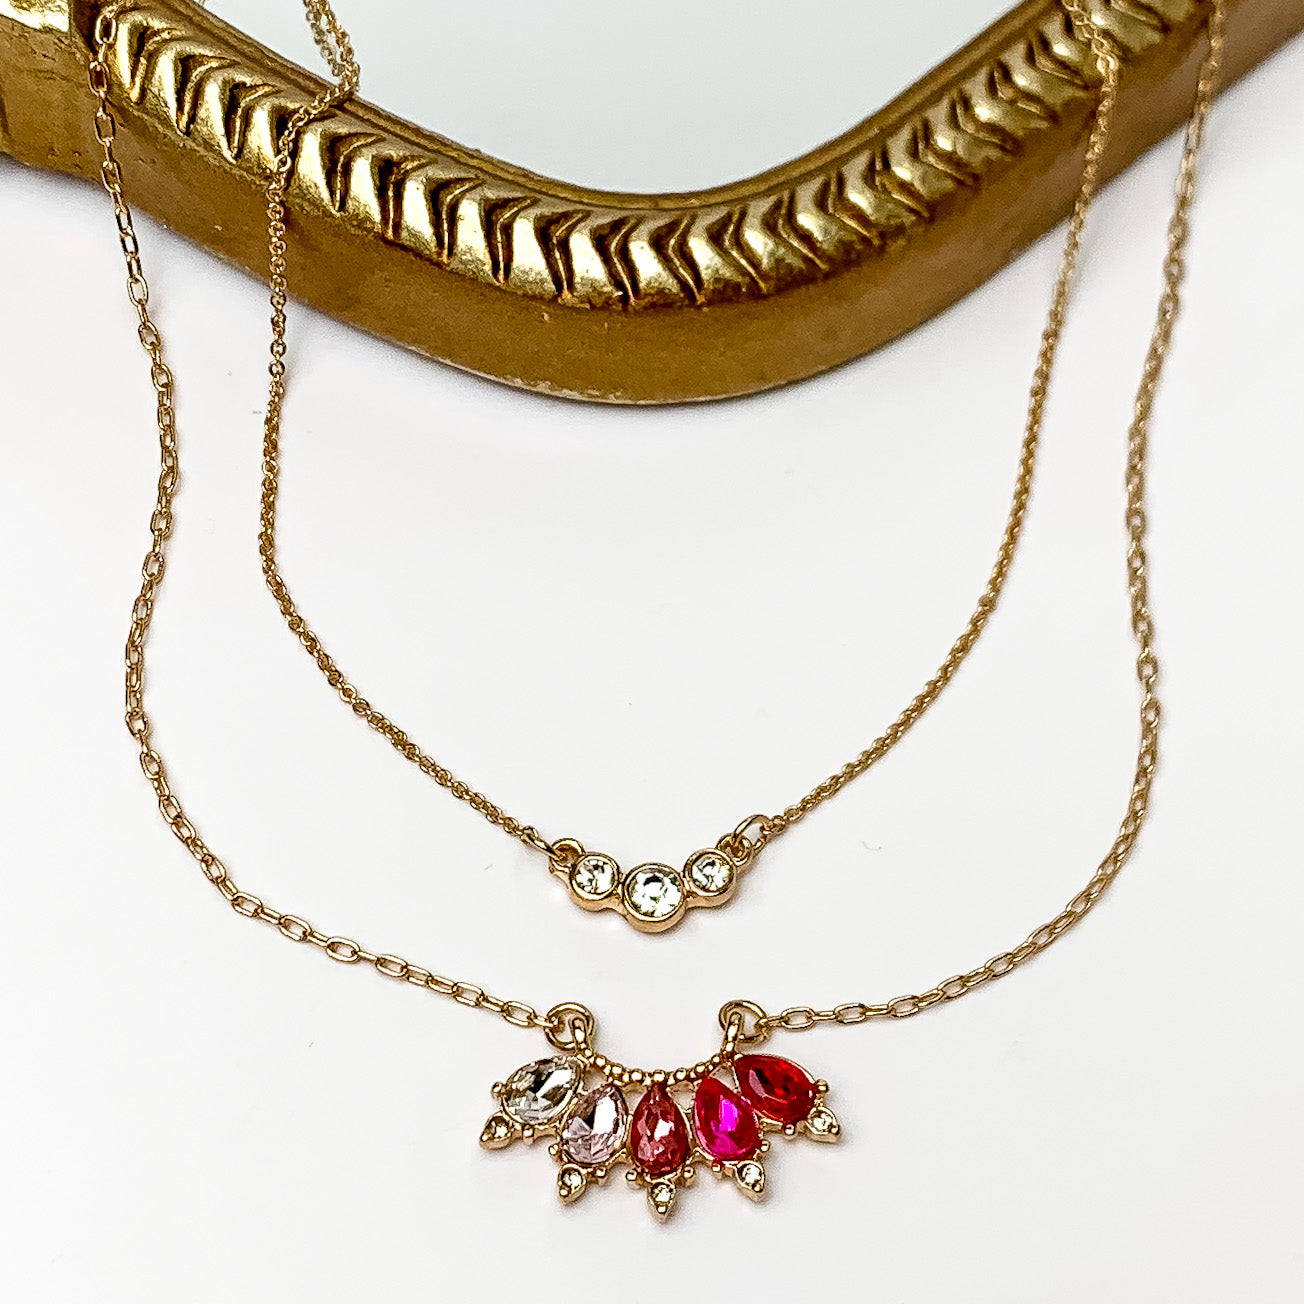 Dazzling Gold Tone Necklace With Pink Crystals. Pictured on a white background with a gold frame behind the necklace.